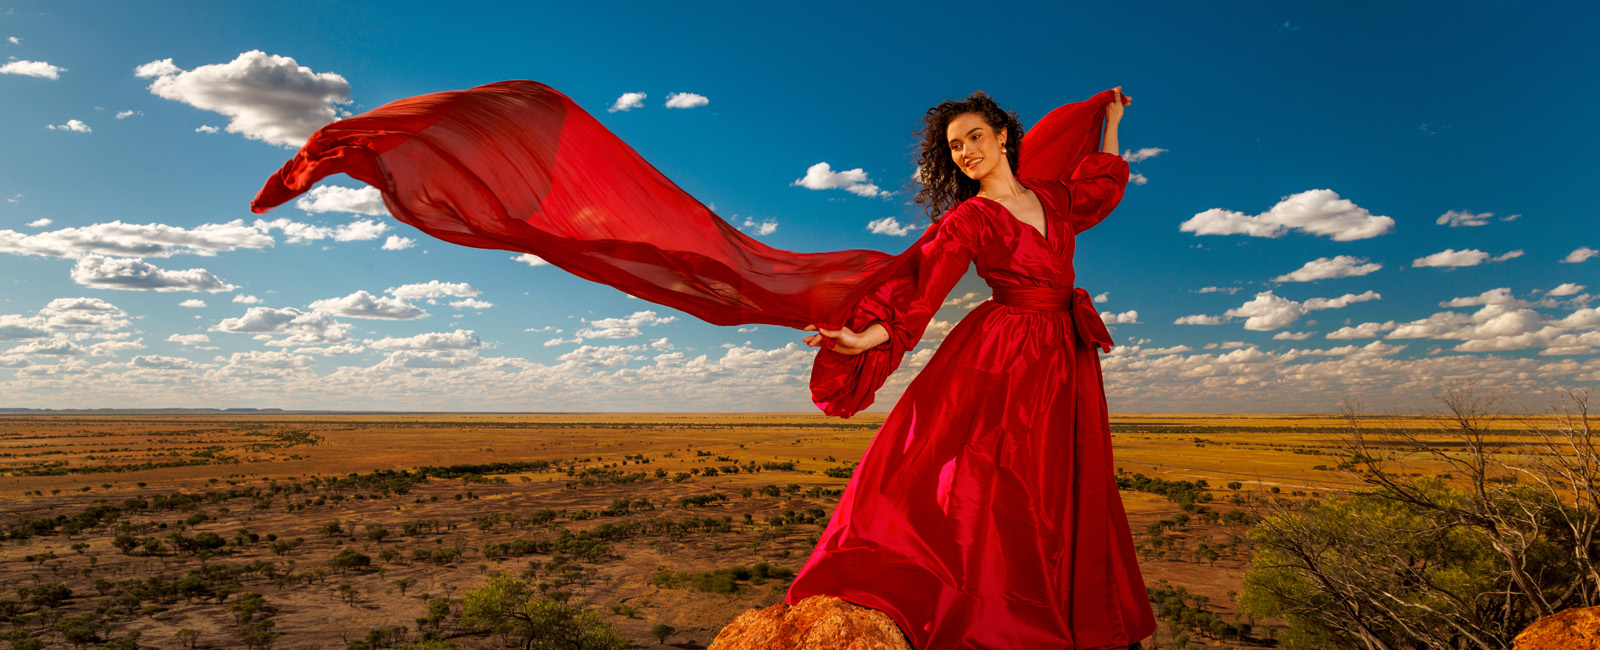 A women in a red dress in the outback